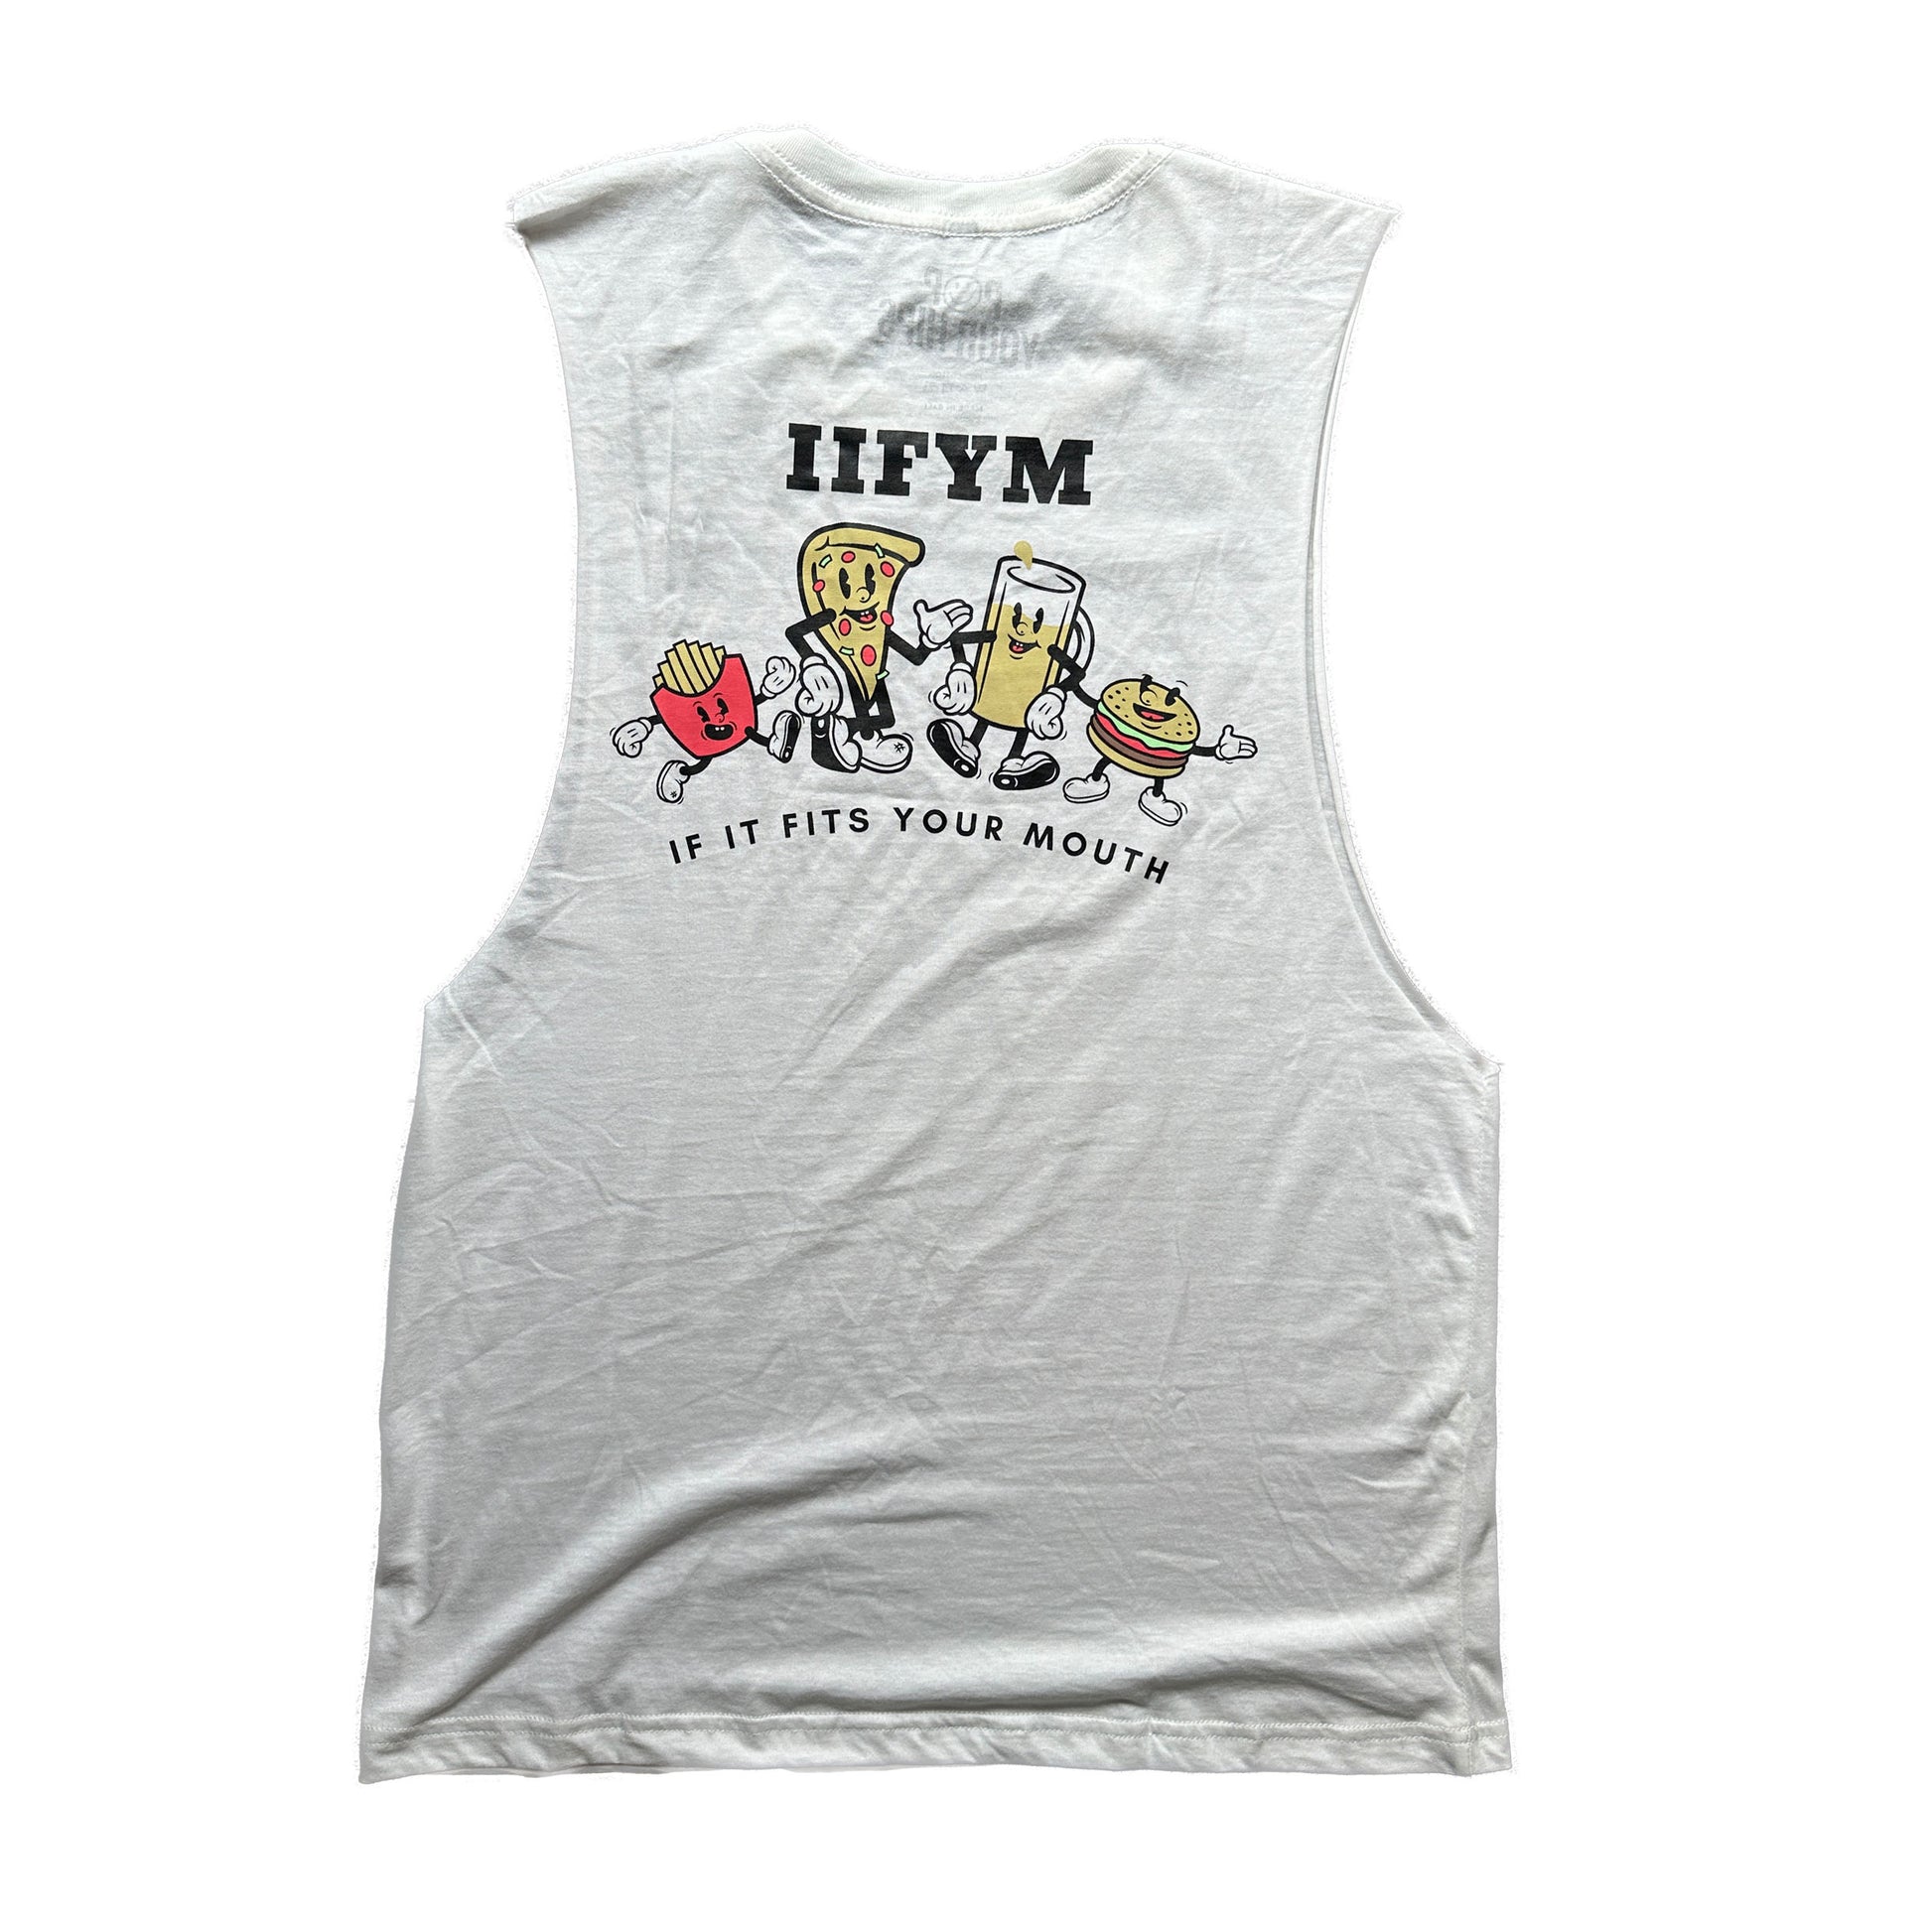 IIFYM (If it fits your mouth) muscle tank 